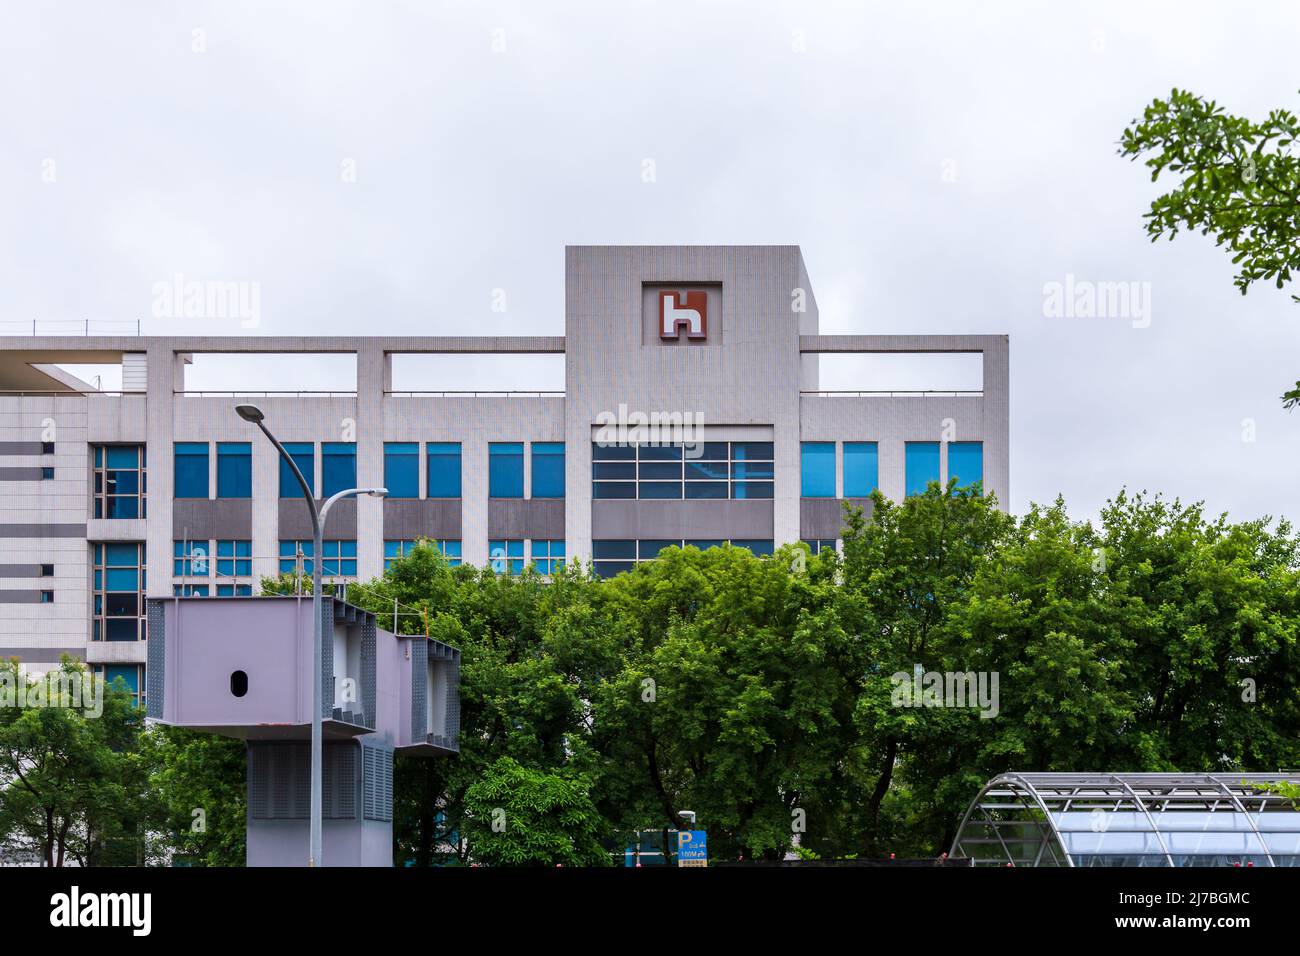 NEW TAIPEI CITY, TAIWAN - APRIL 30, 2022: Foxconn Technology Group headquarters in Tucheng. A a provider of electronics manufacturing services also kn Stock Photo